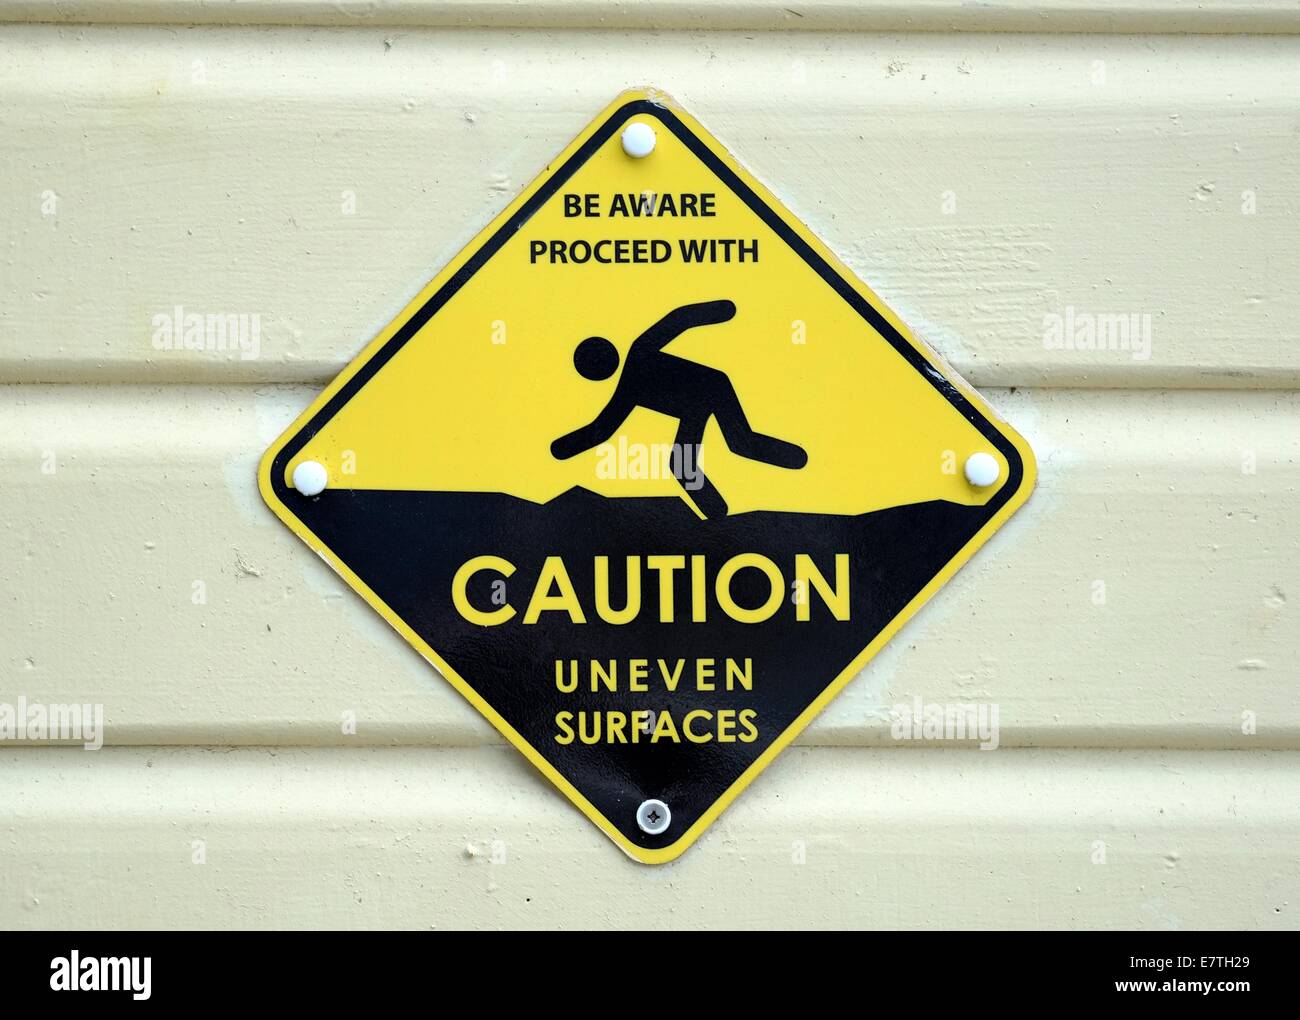 Be aware proceed with caution uneven surfaces warning sign england uk Stock Photo